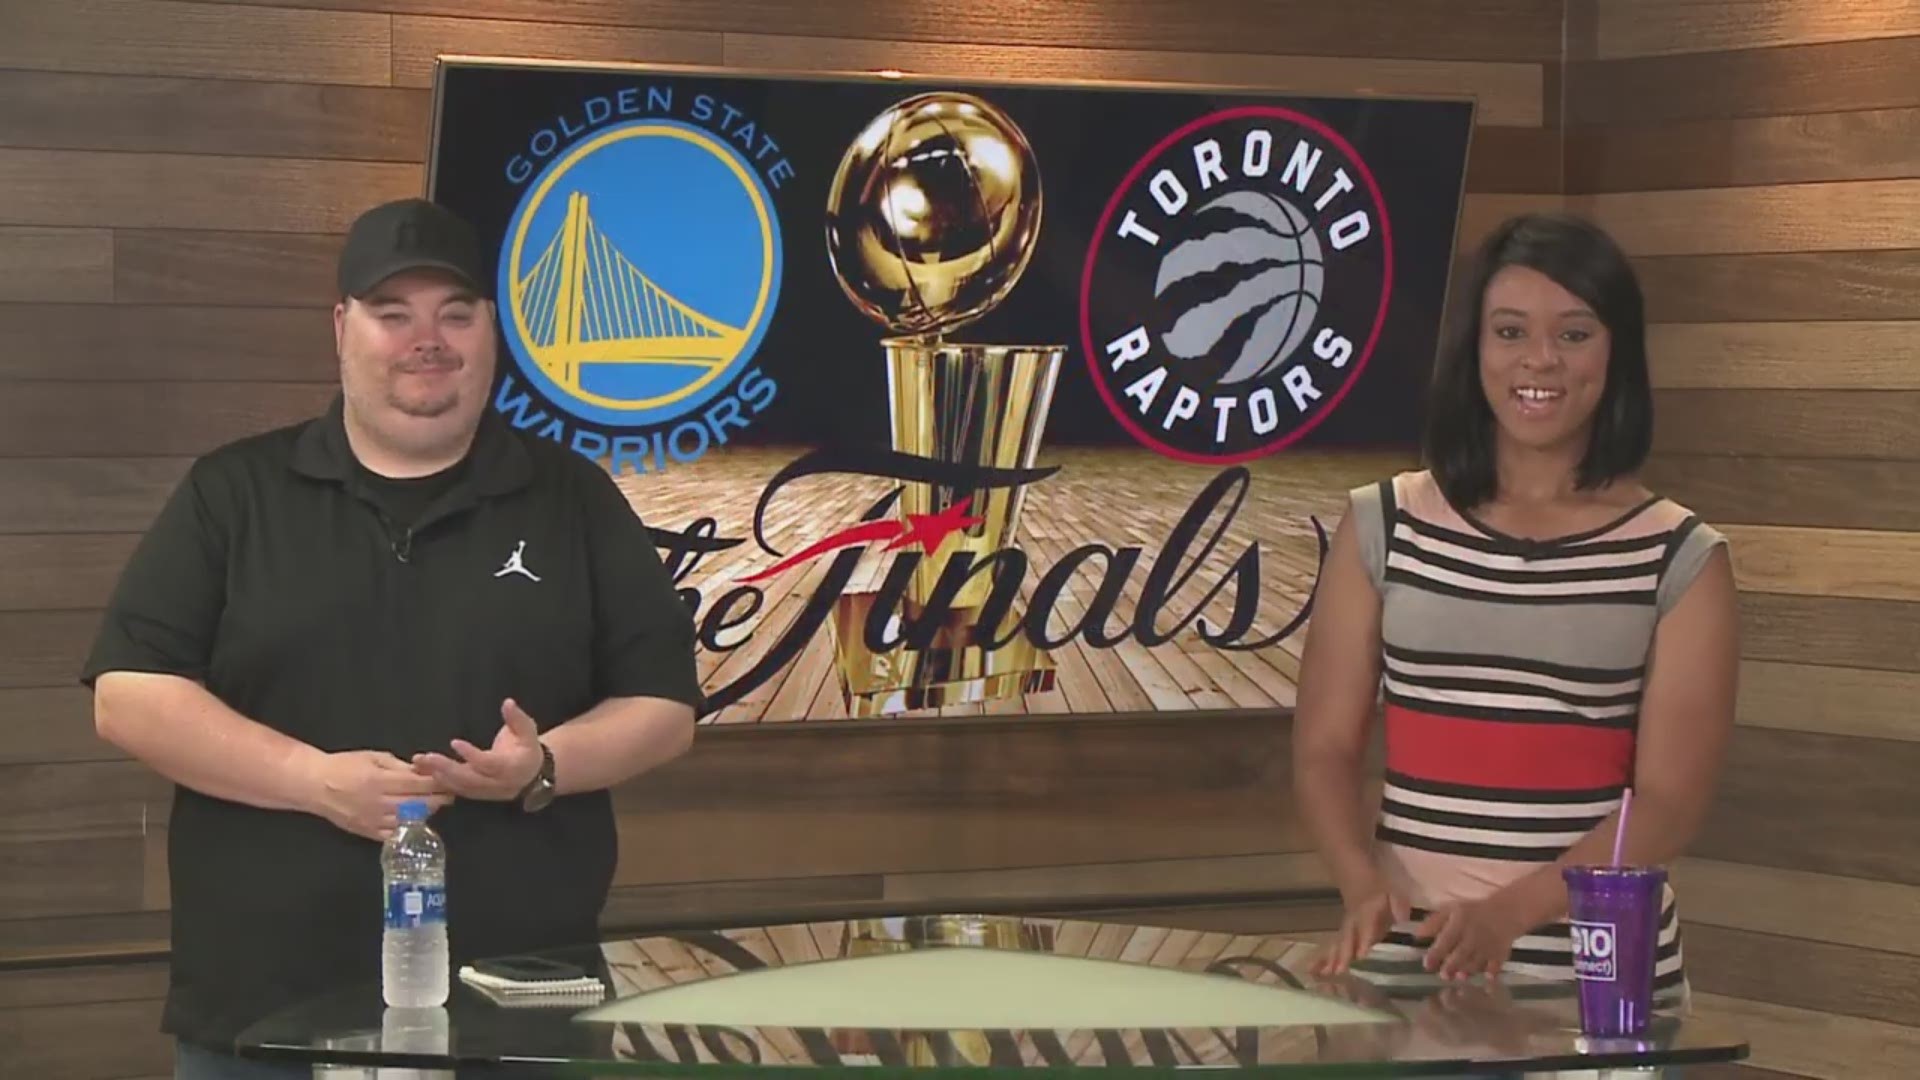 ABC10's Lina Washington and Sean Cunningham preview the NBA Finals between the Golden State Warriors and the Toronto Raptors, make their picks for the series and discuss the various storylines heading into the series.